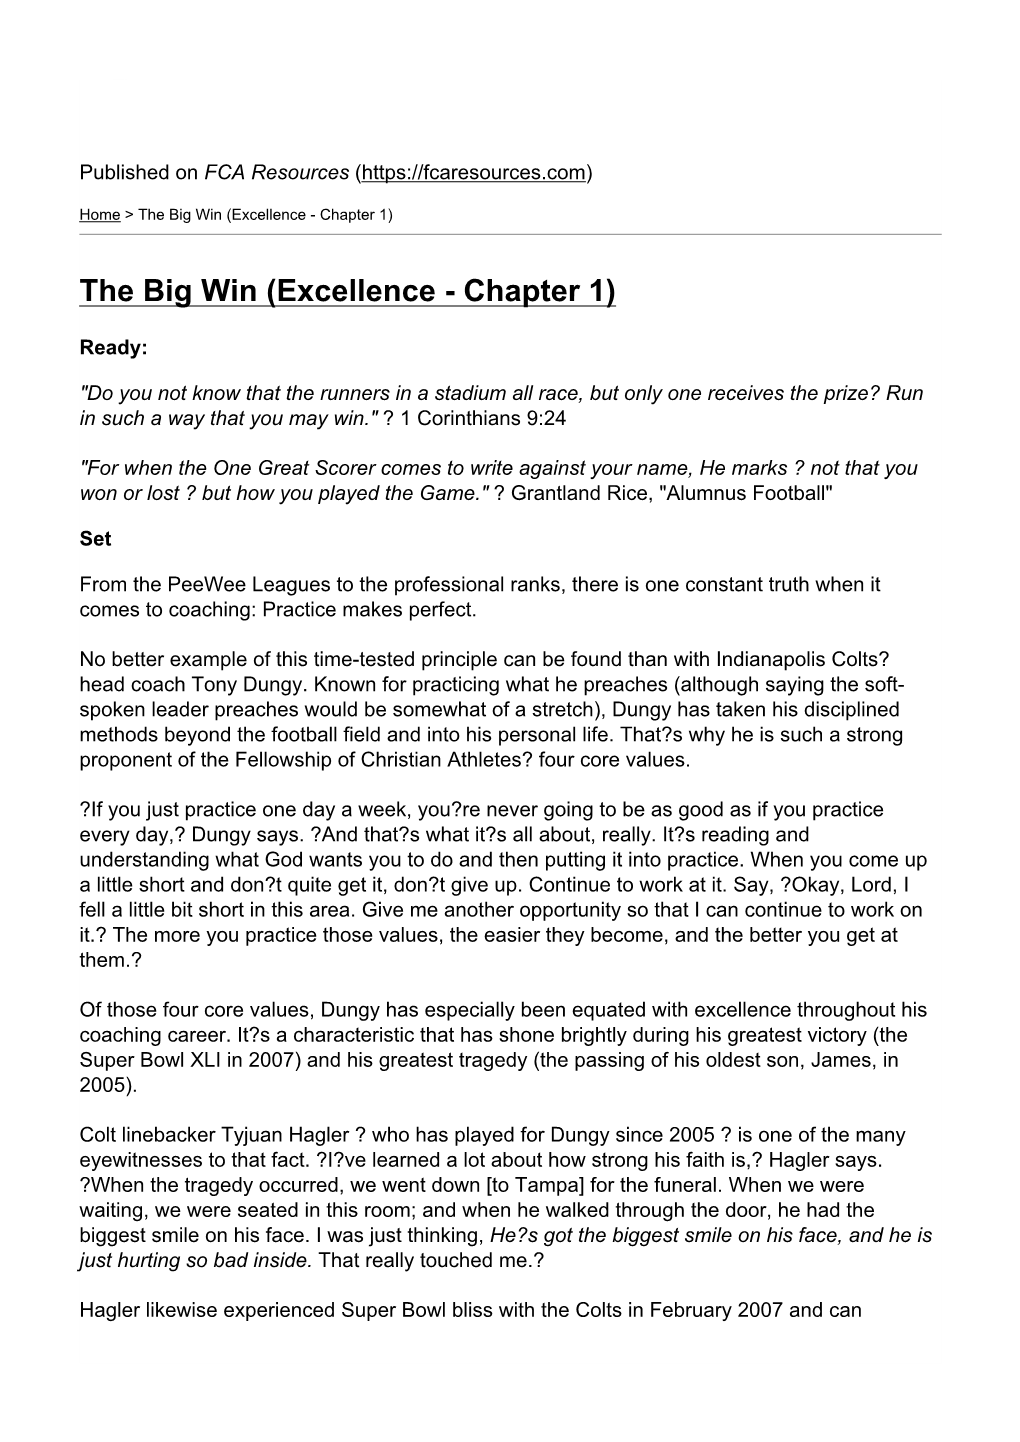 The Big Win (Excellence - Chapter 1)